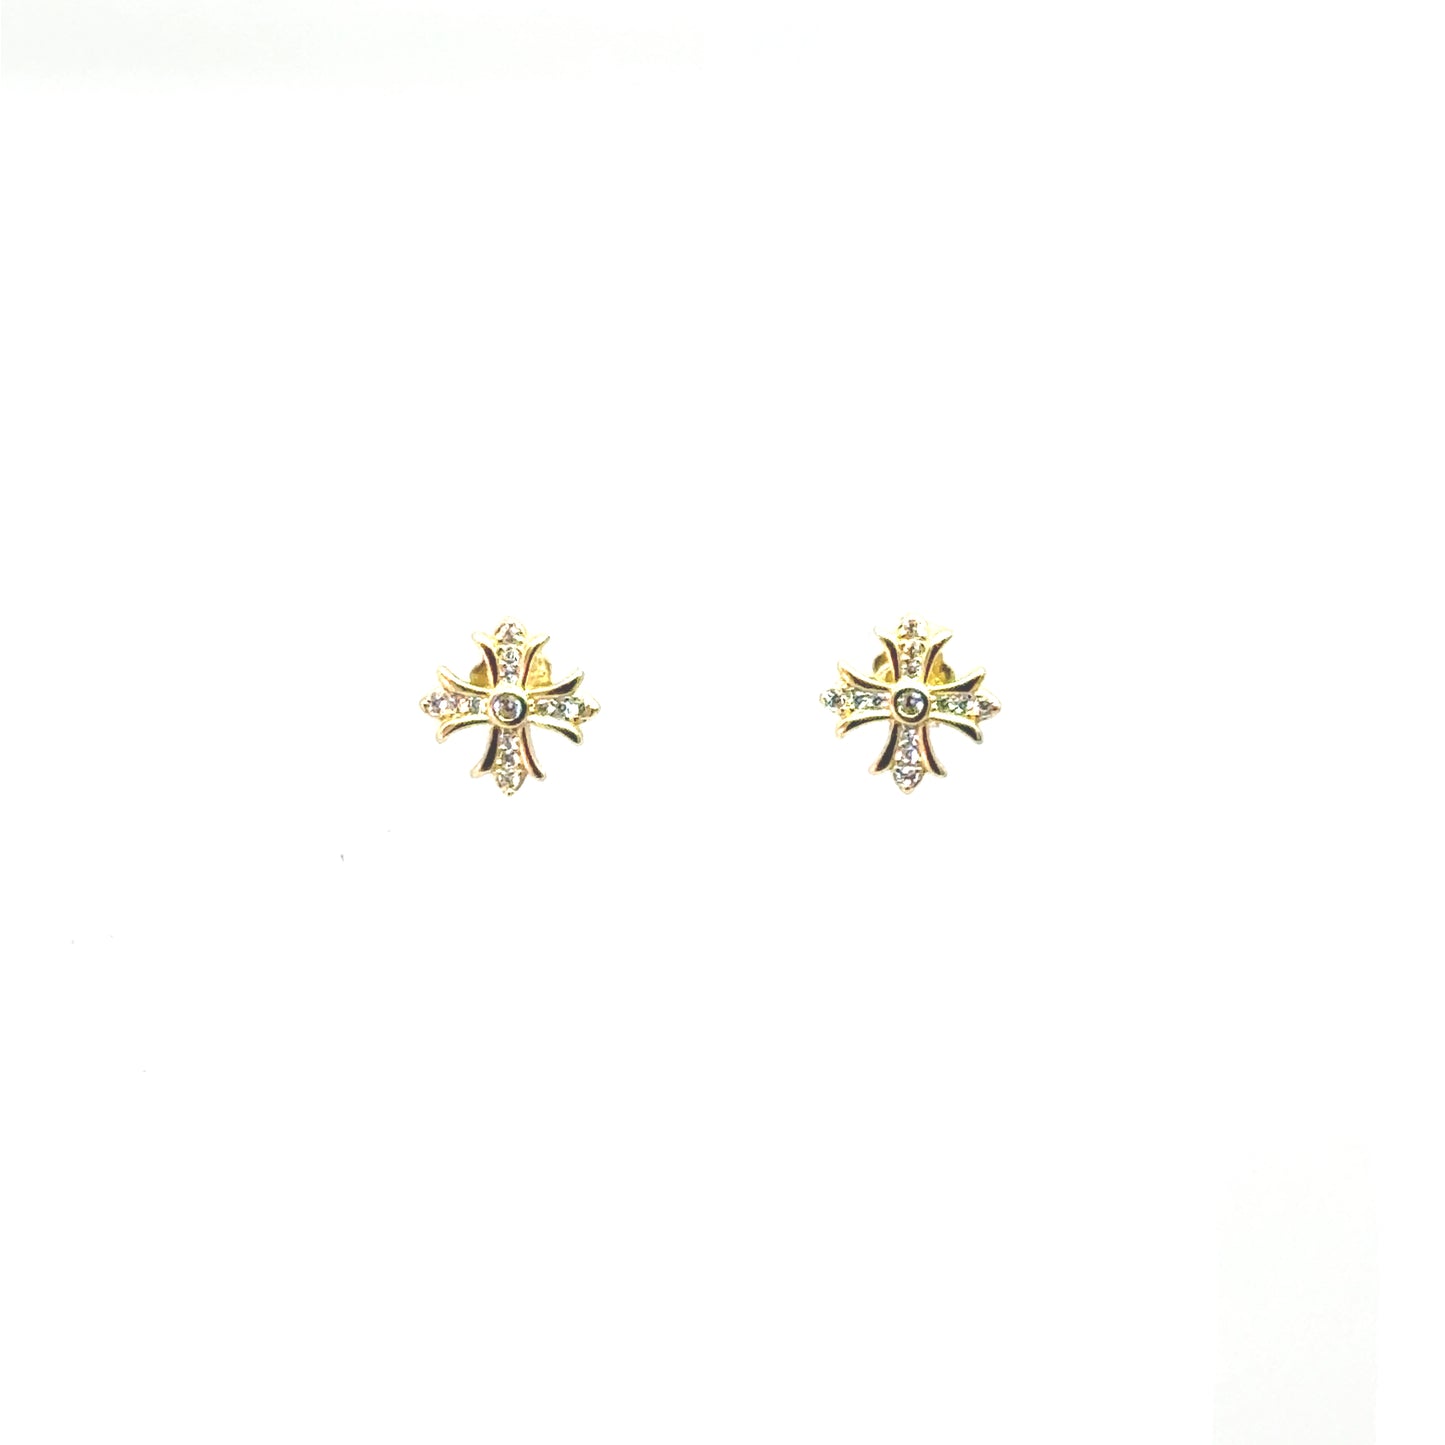 Medieval Cross Earrings in Sterling Silver or 18k Gold Over Silver with CZs